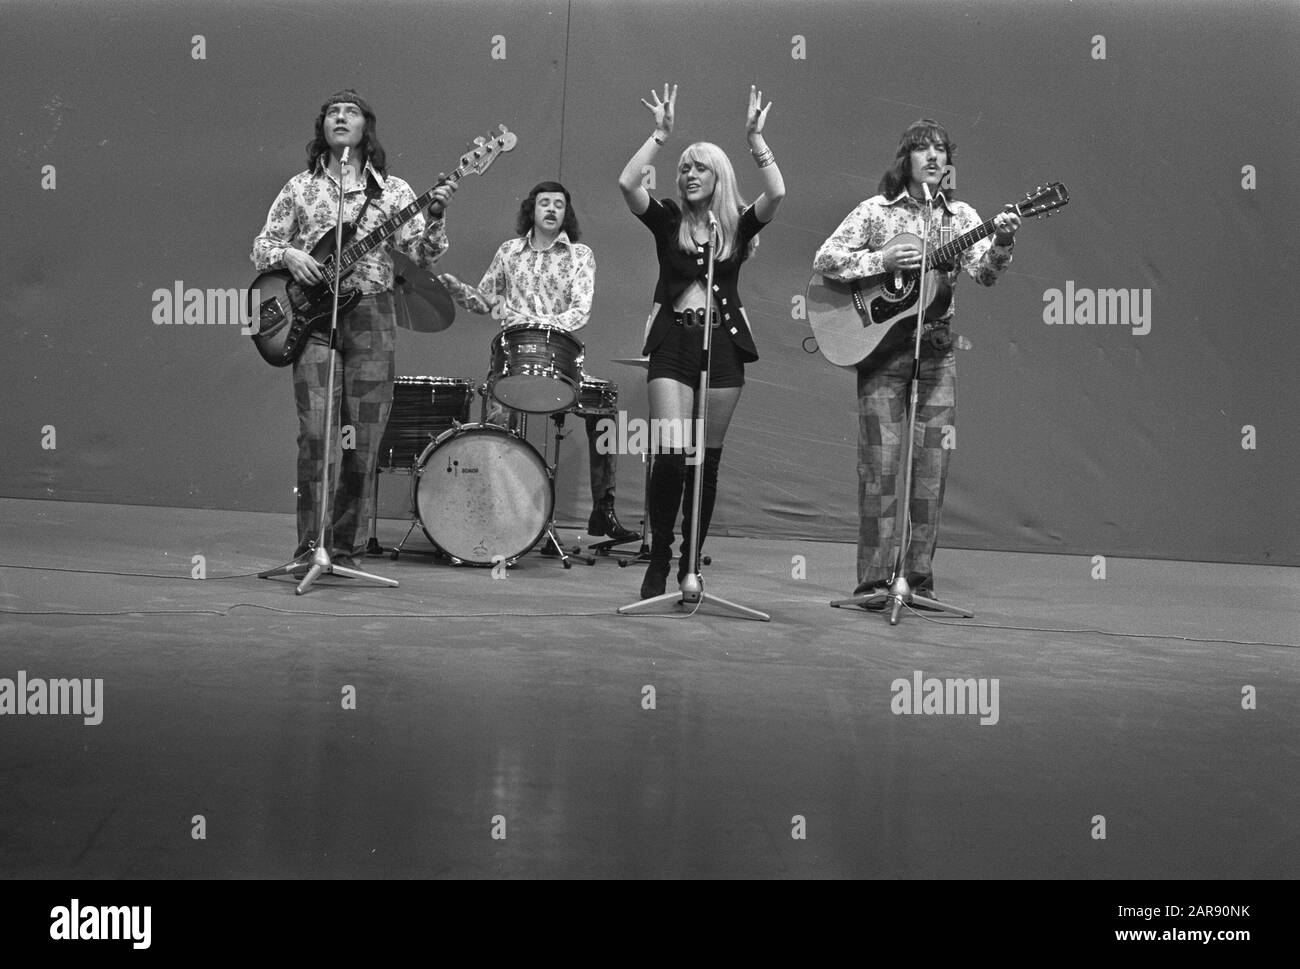 Beatgroep Middle of the Road on TV show Toppop. Sally Carr (singer), Ian McCredie (guitar), Neil Henderson (guitar), and Ken Andrew (drums). Stock Photo